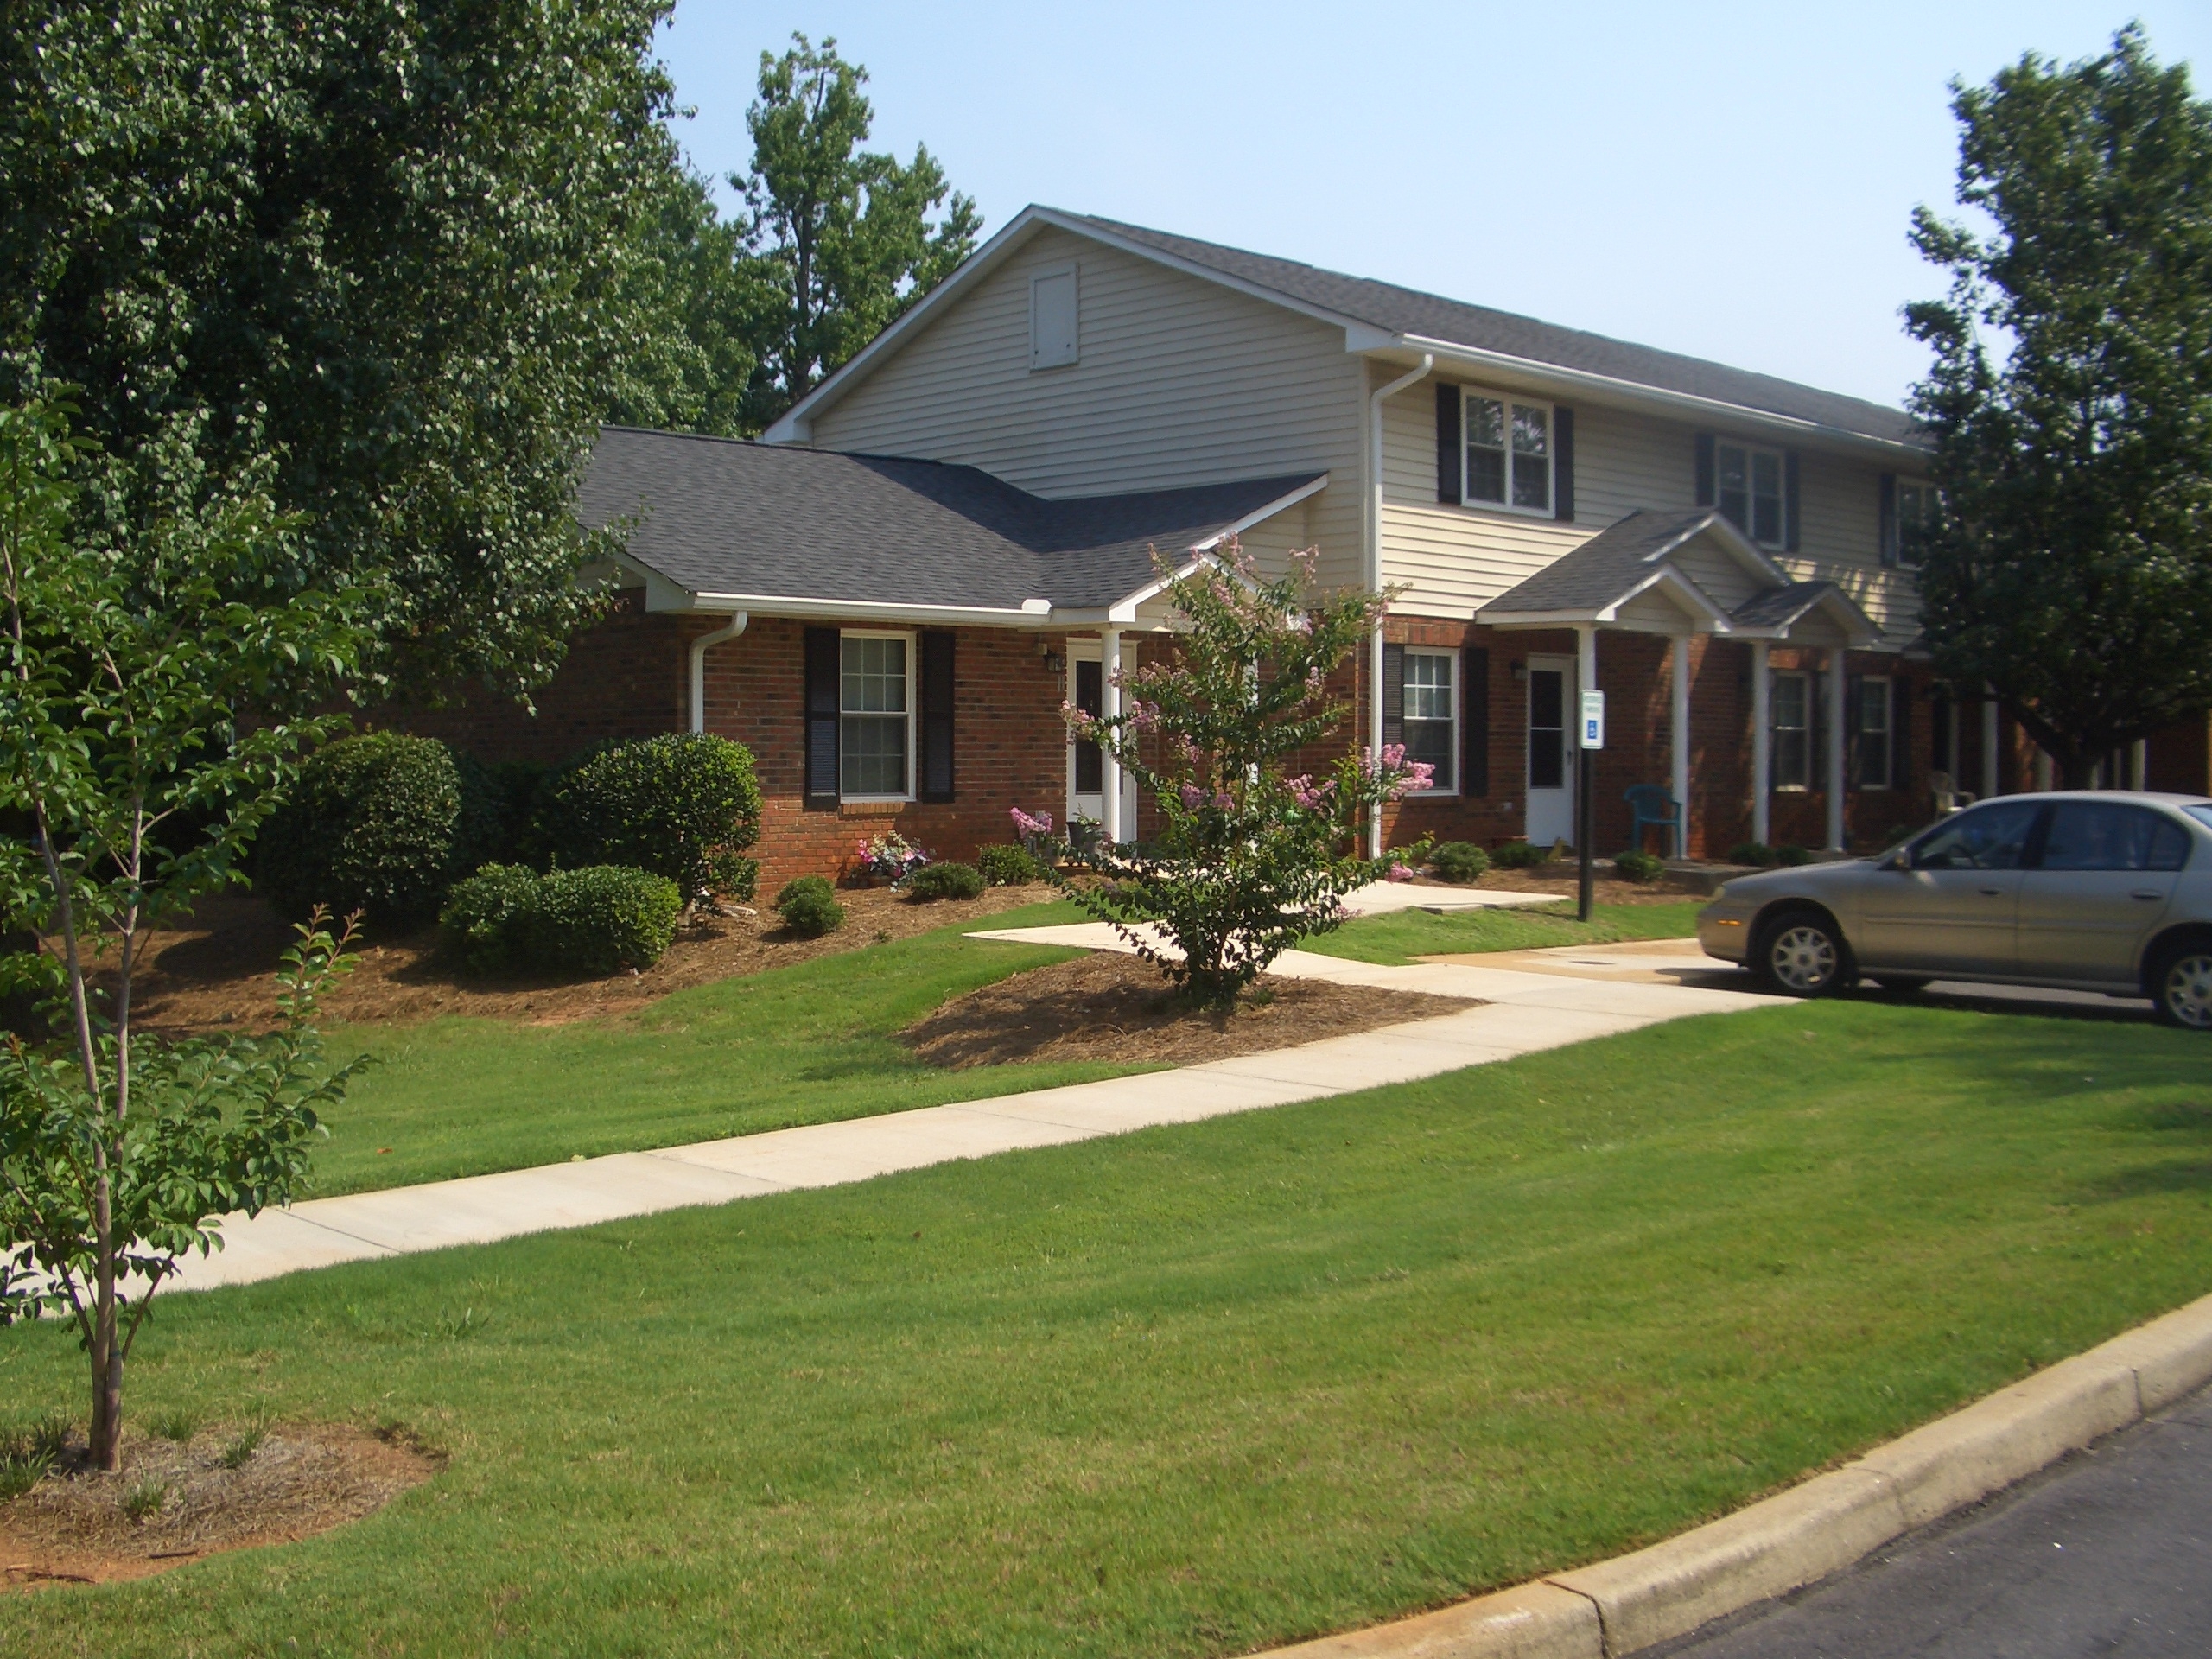 HOLLY SPRINGS APARTMENTS